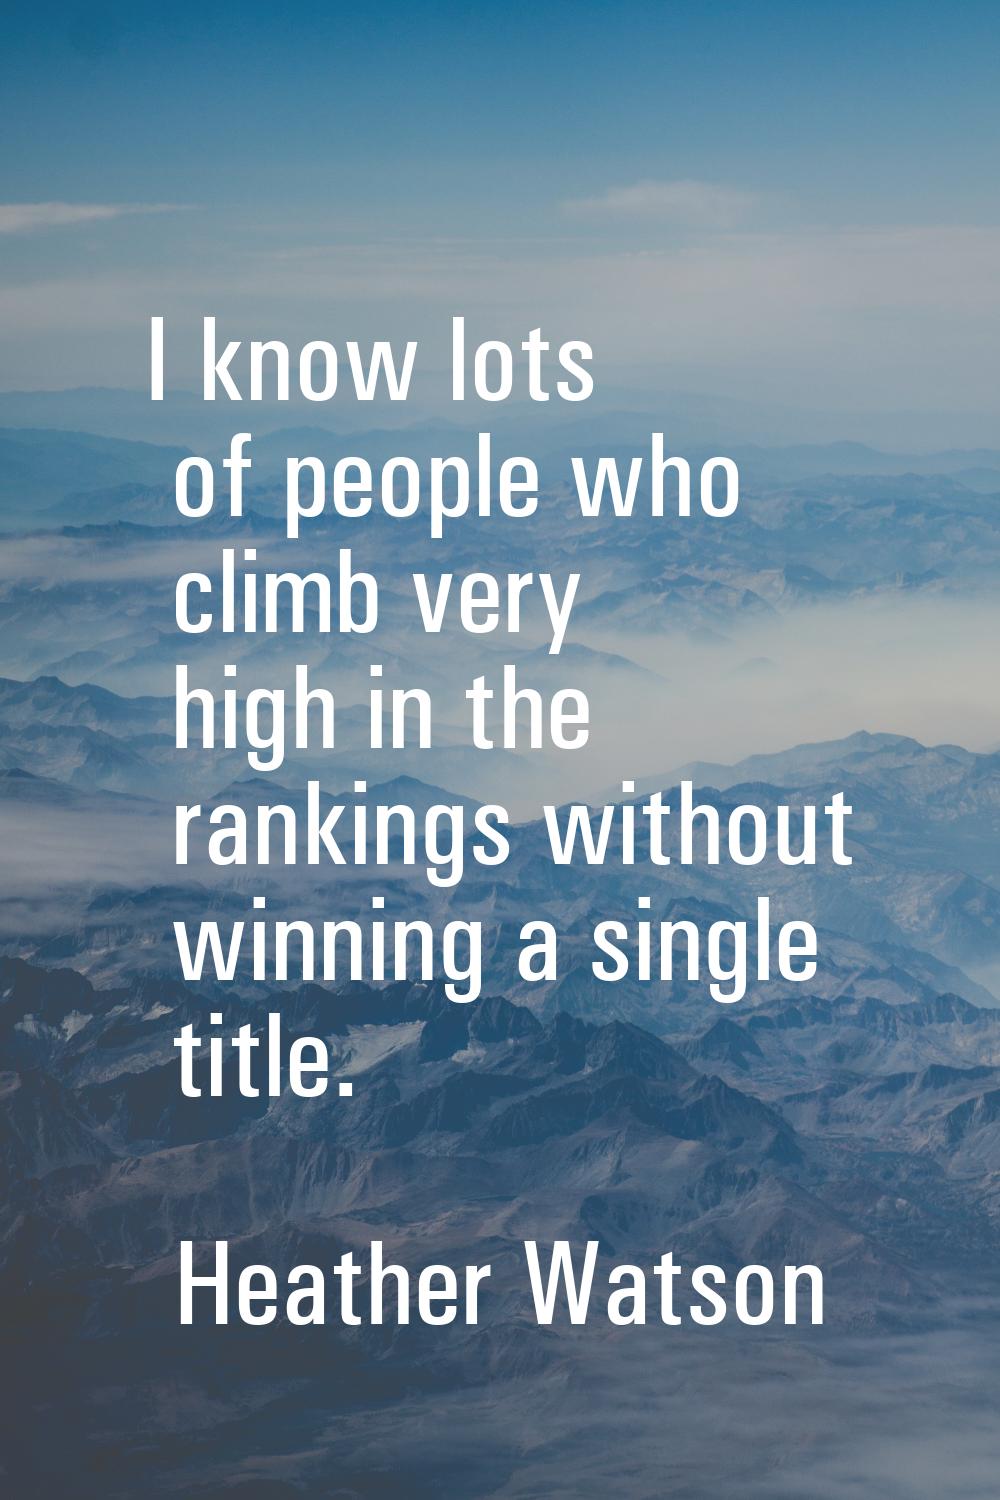 I know lots of people who climb very high in the rankings without winning a single title.